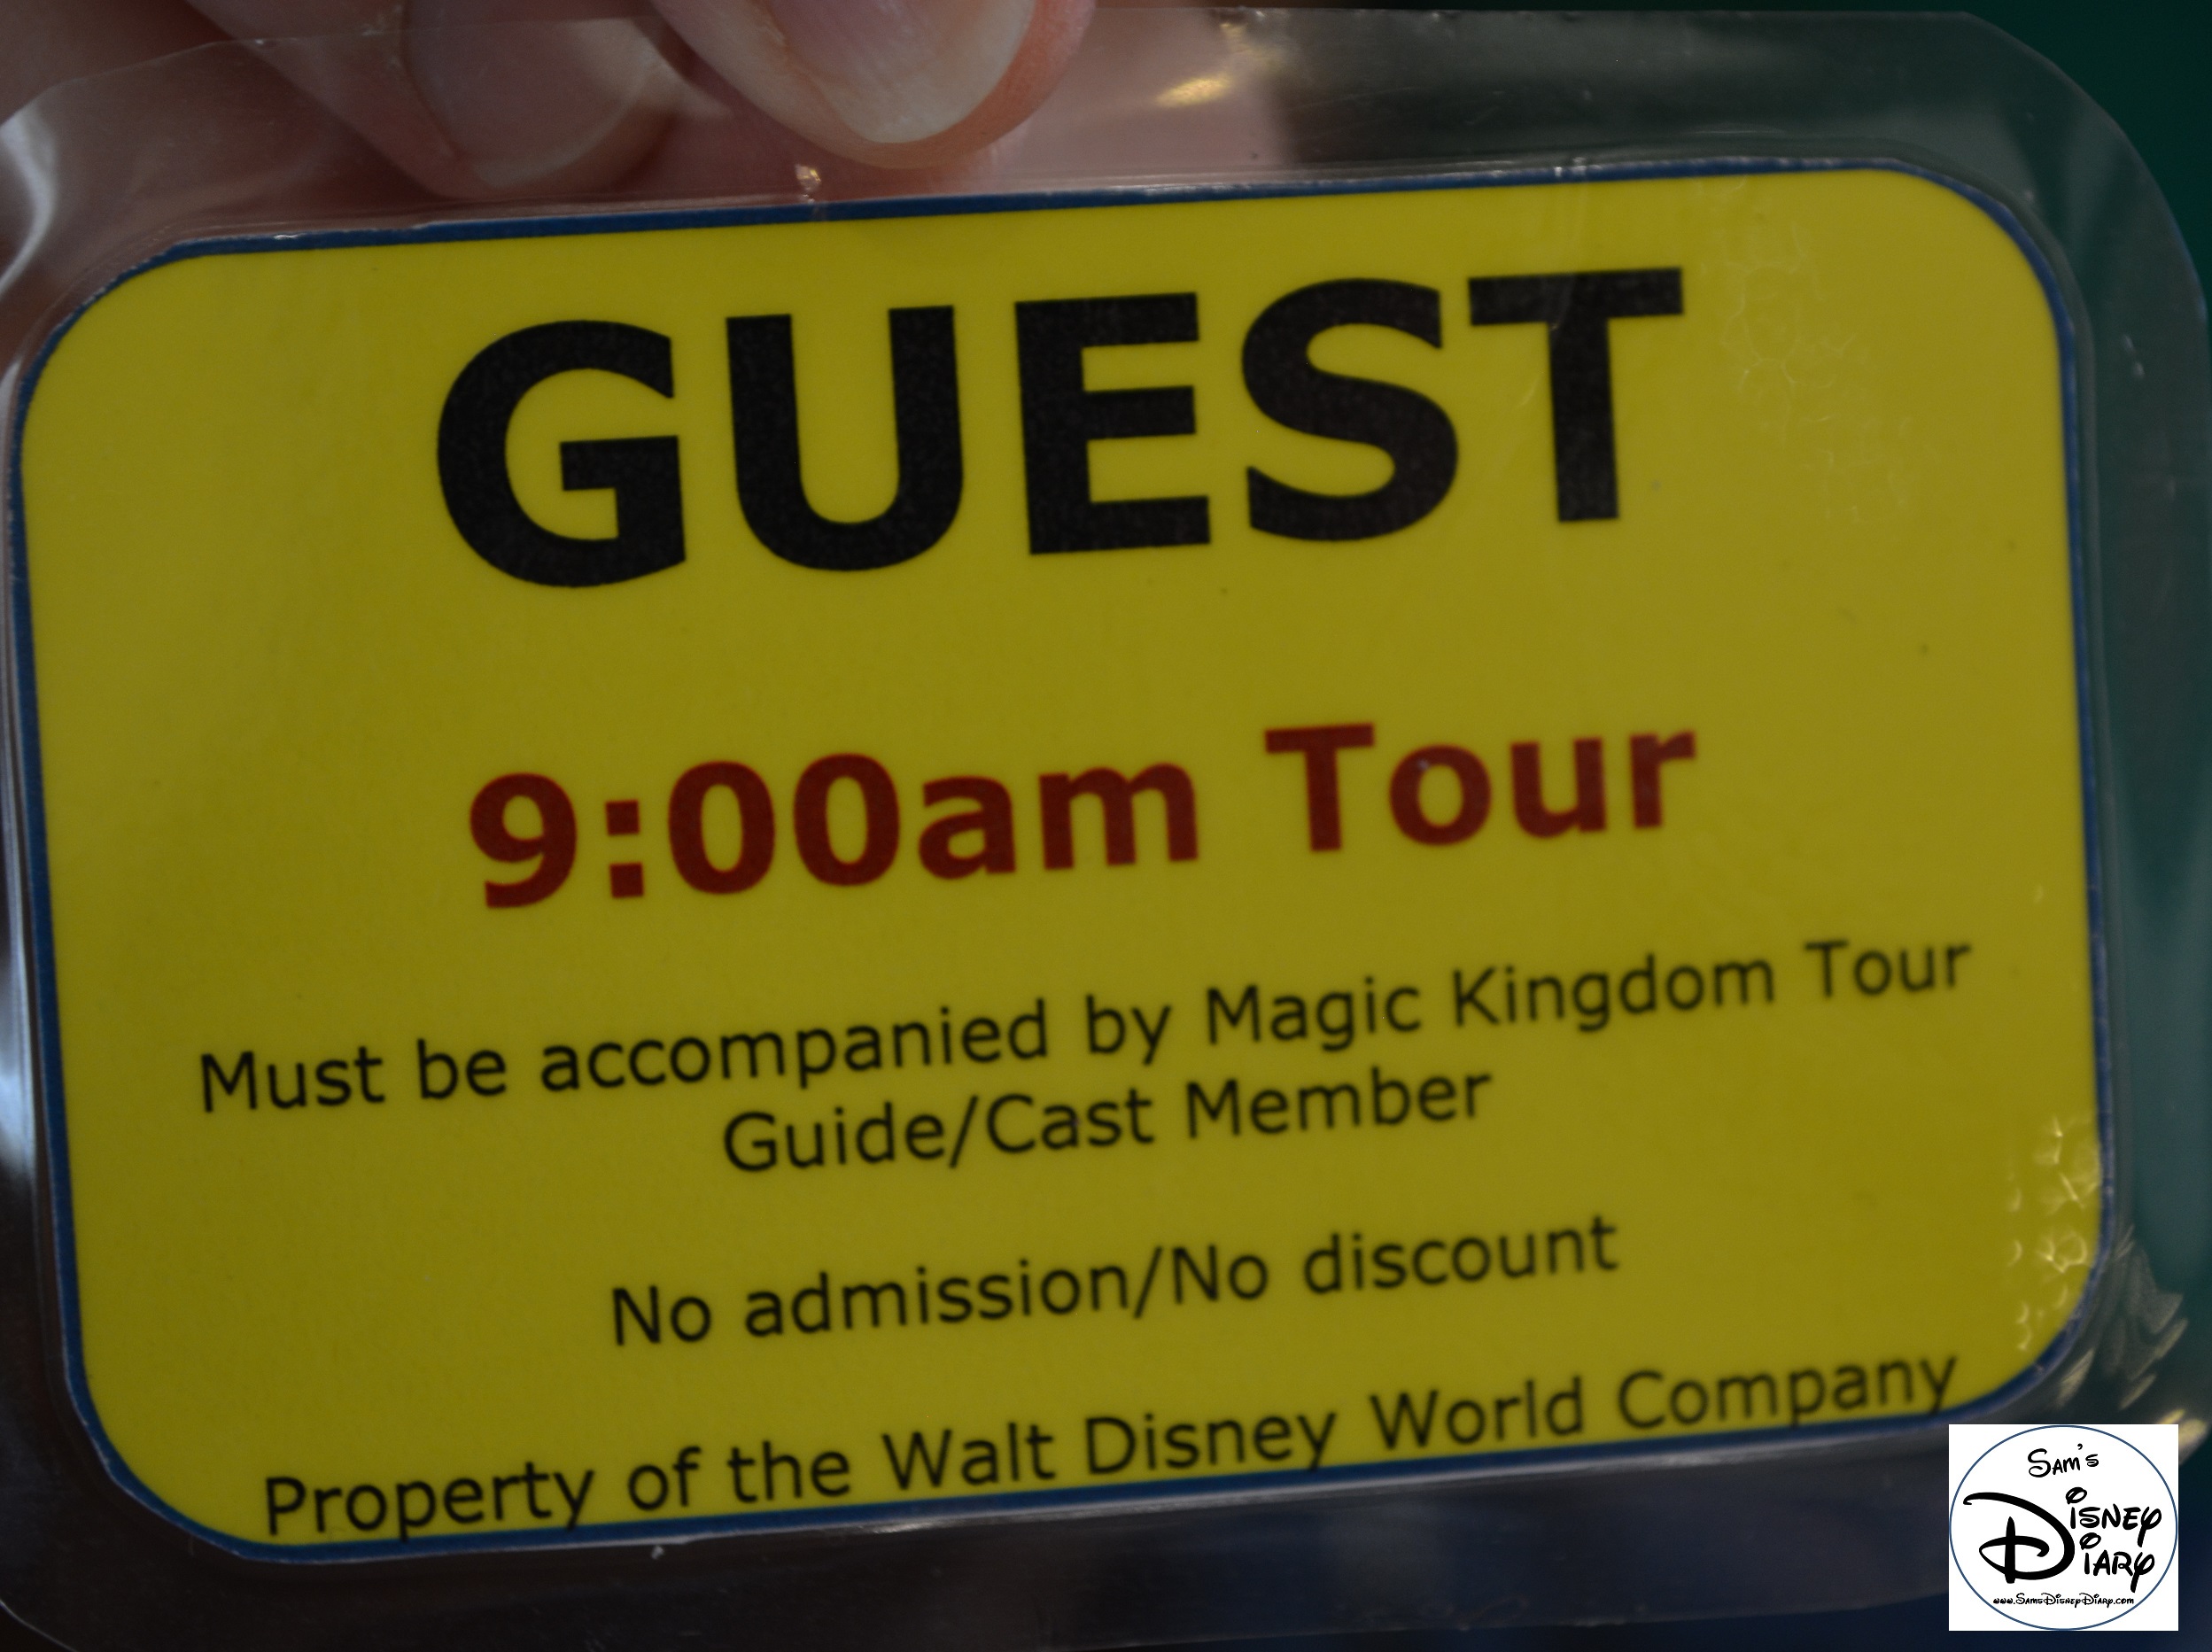 9:00 am Tour… Guests Must be Accompanied by Magic Kingdom Tour Guide, so much for exploring the utilidoors on my own ;-) 